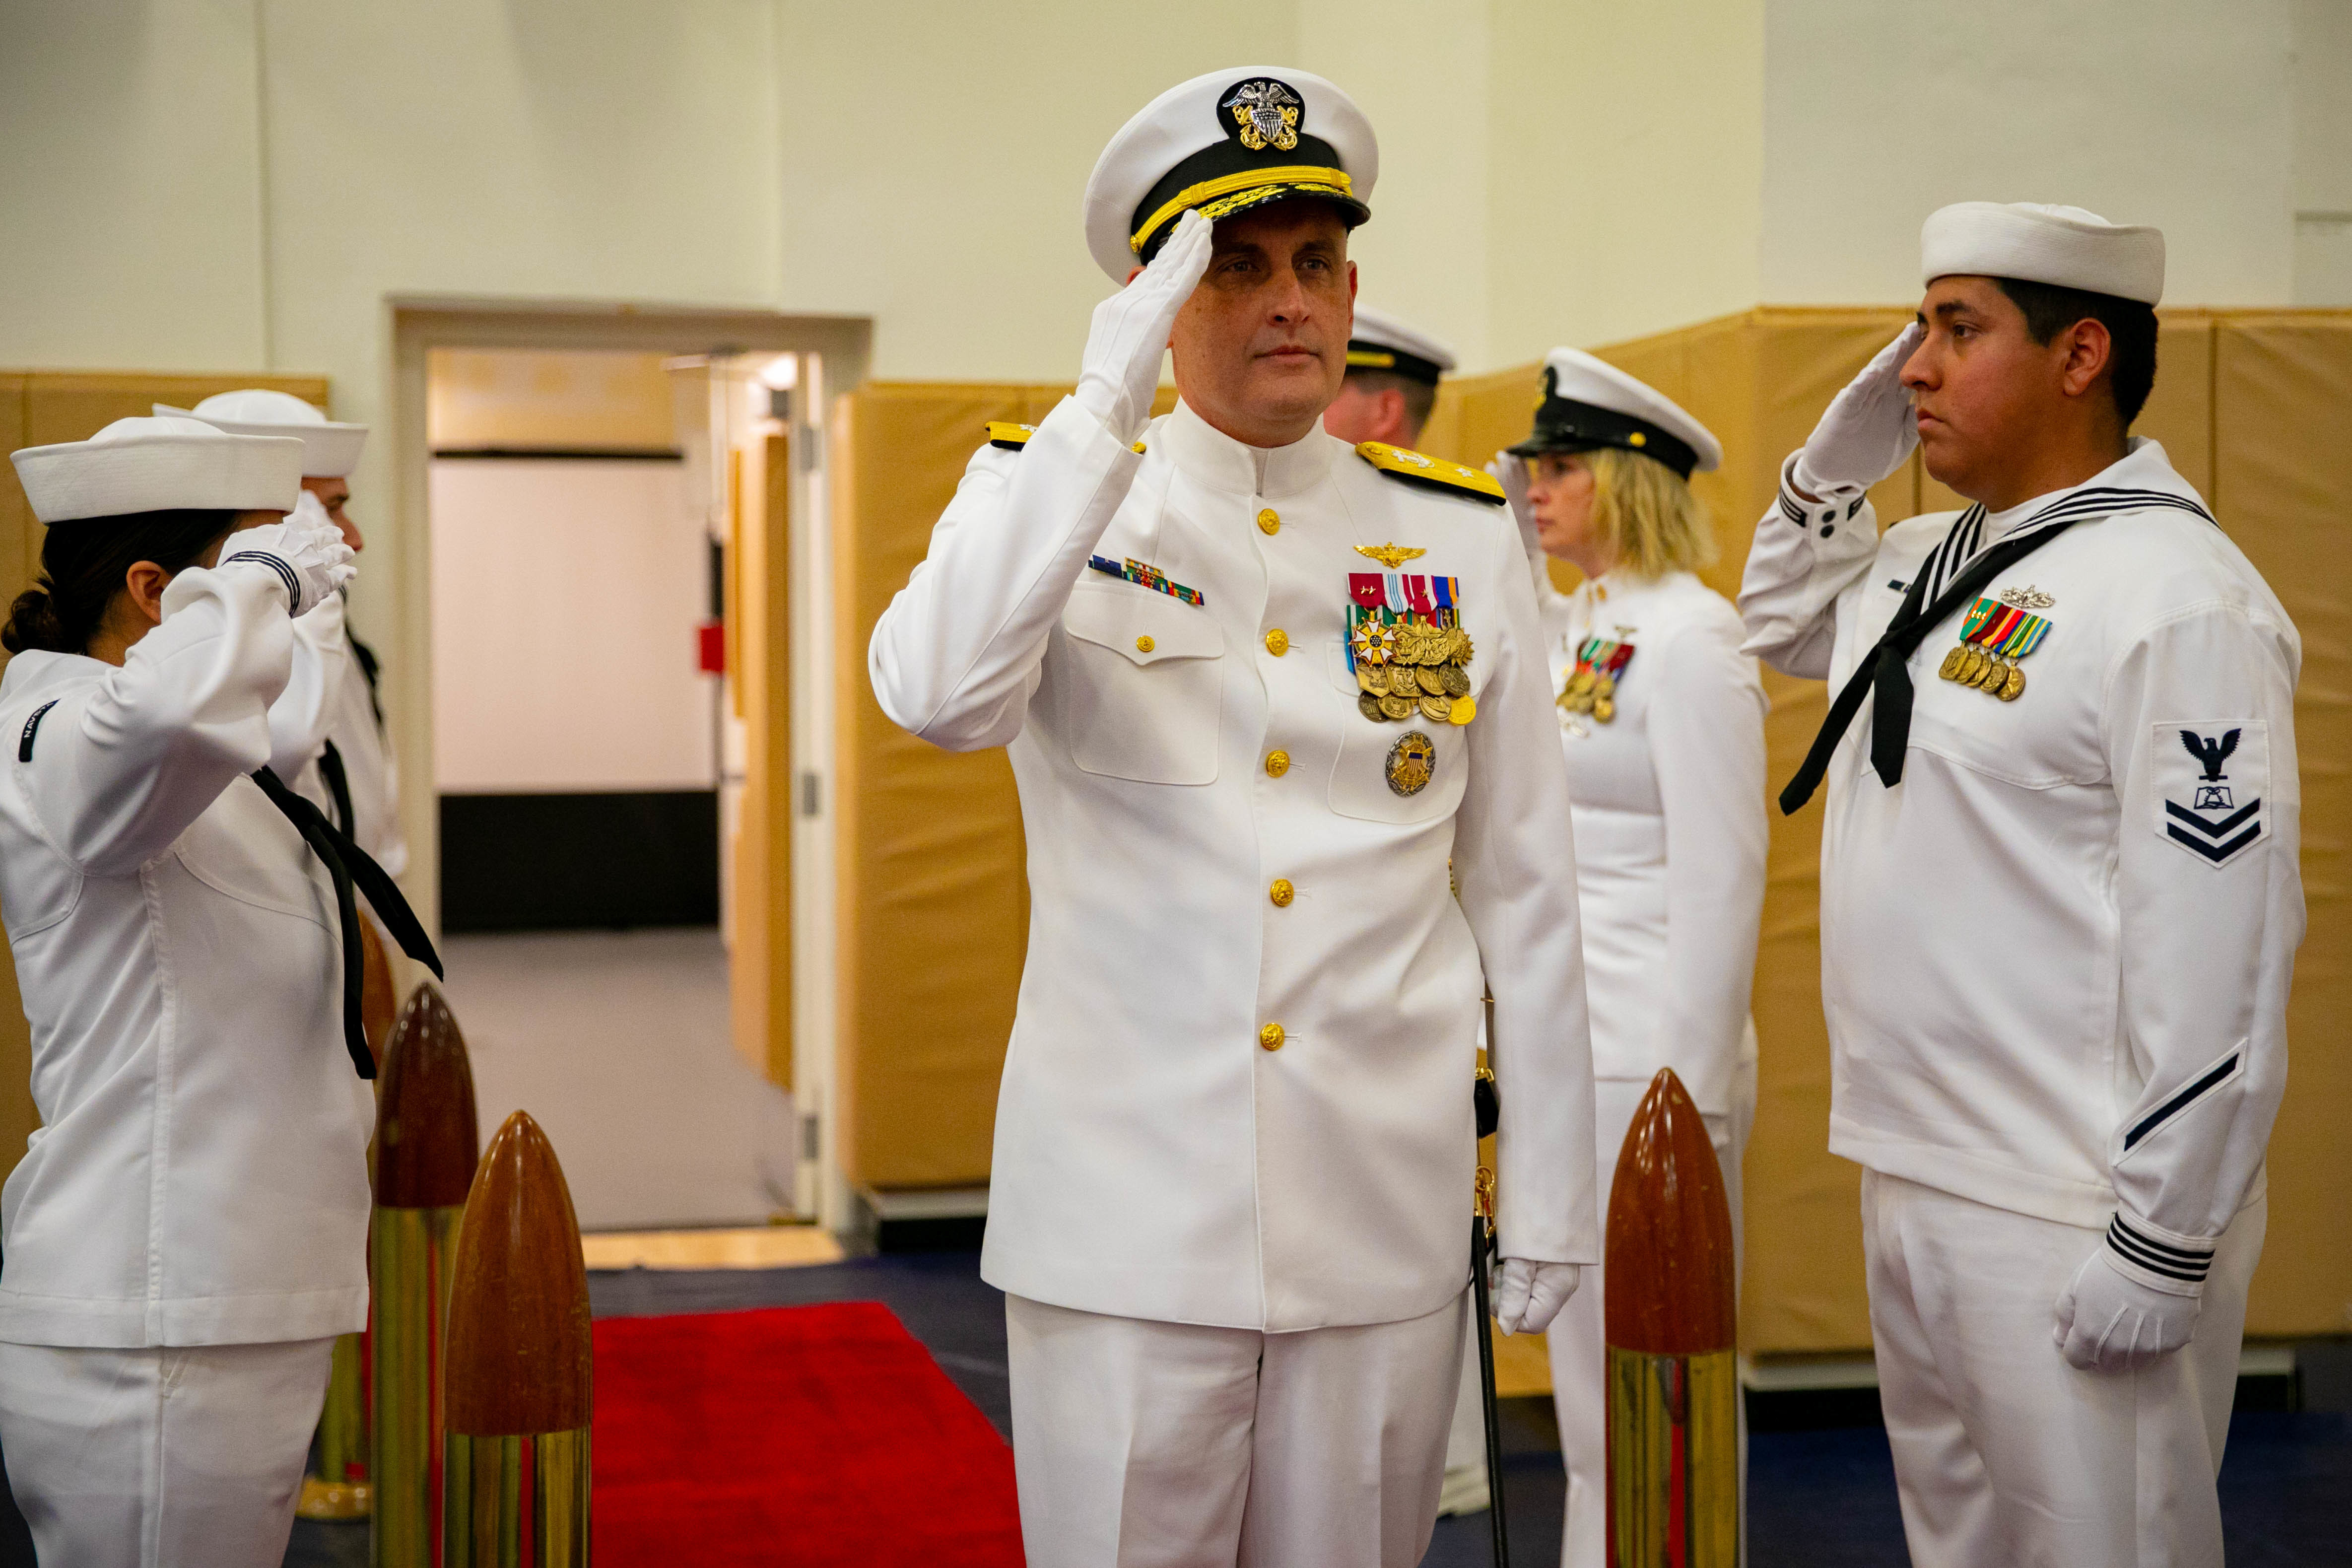 Rear Adm. Wesley McCall, commander of Navy Region Southeast, arrives with the official party during the base change of command ceremony at Naval Station Mayport, July 8, 2022.